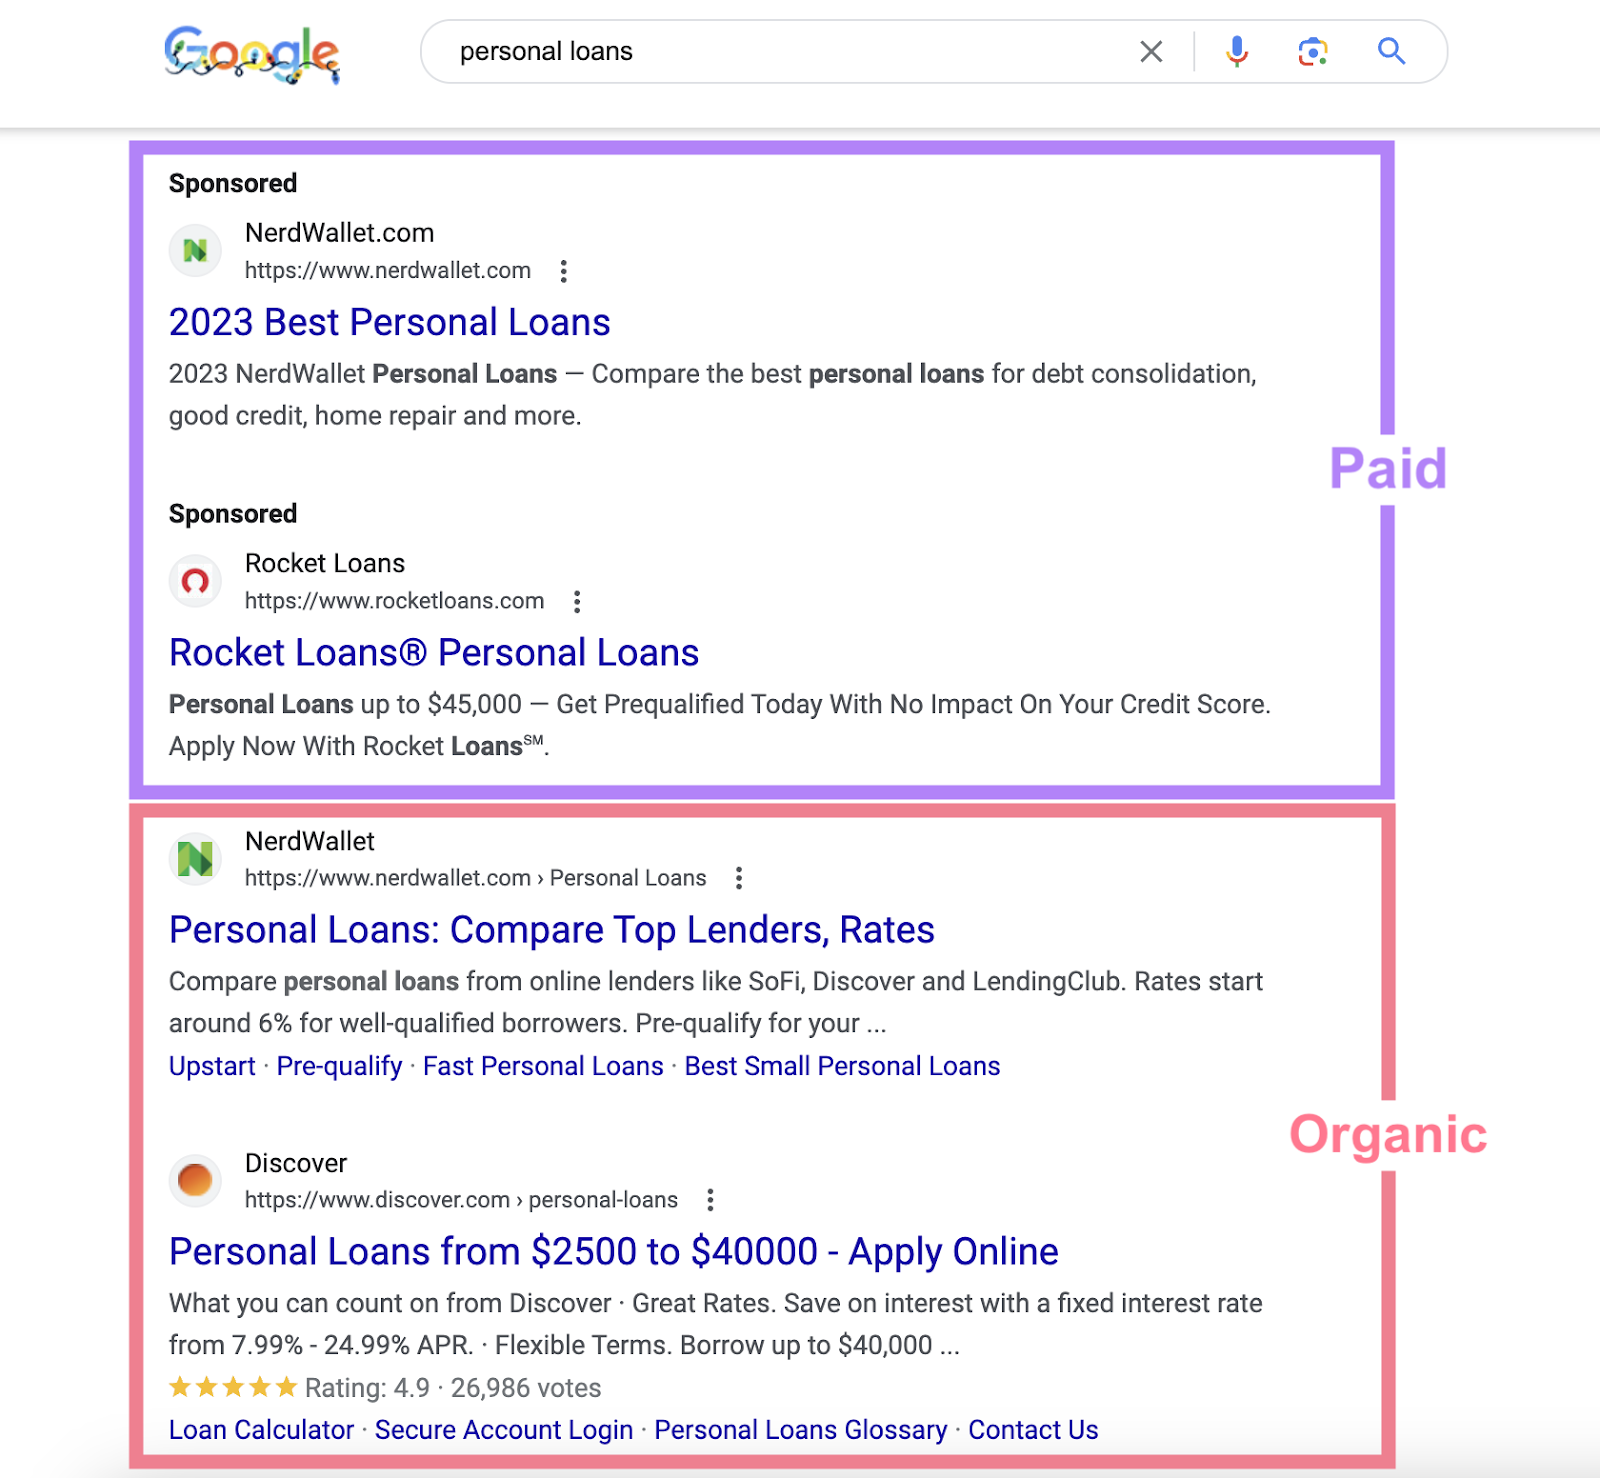 Paid and organic search results on SERP